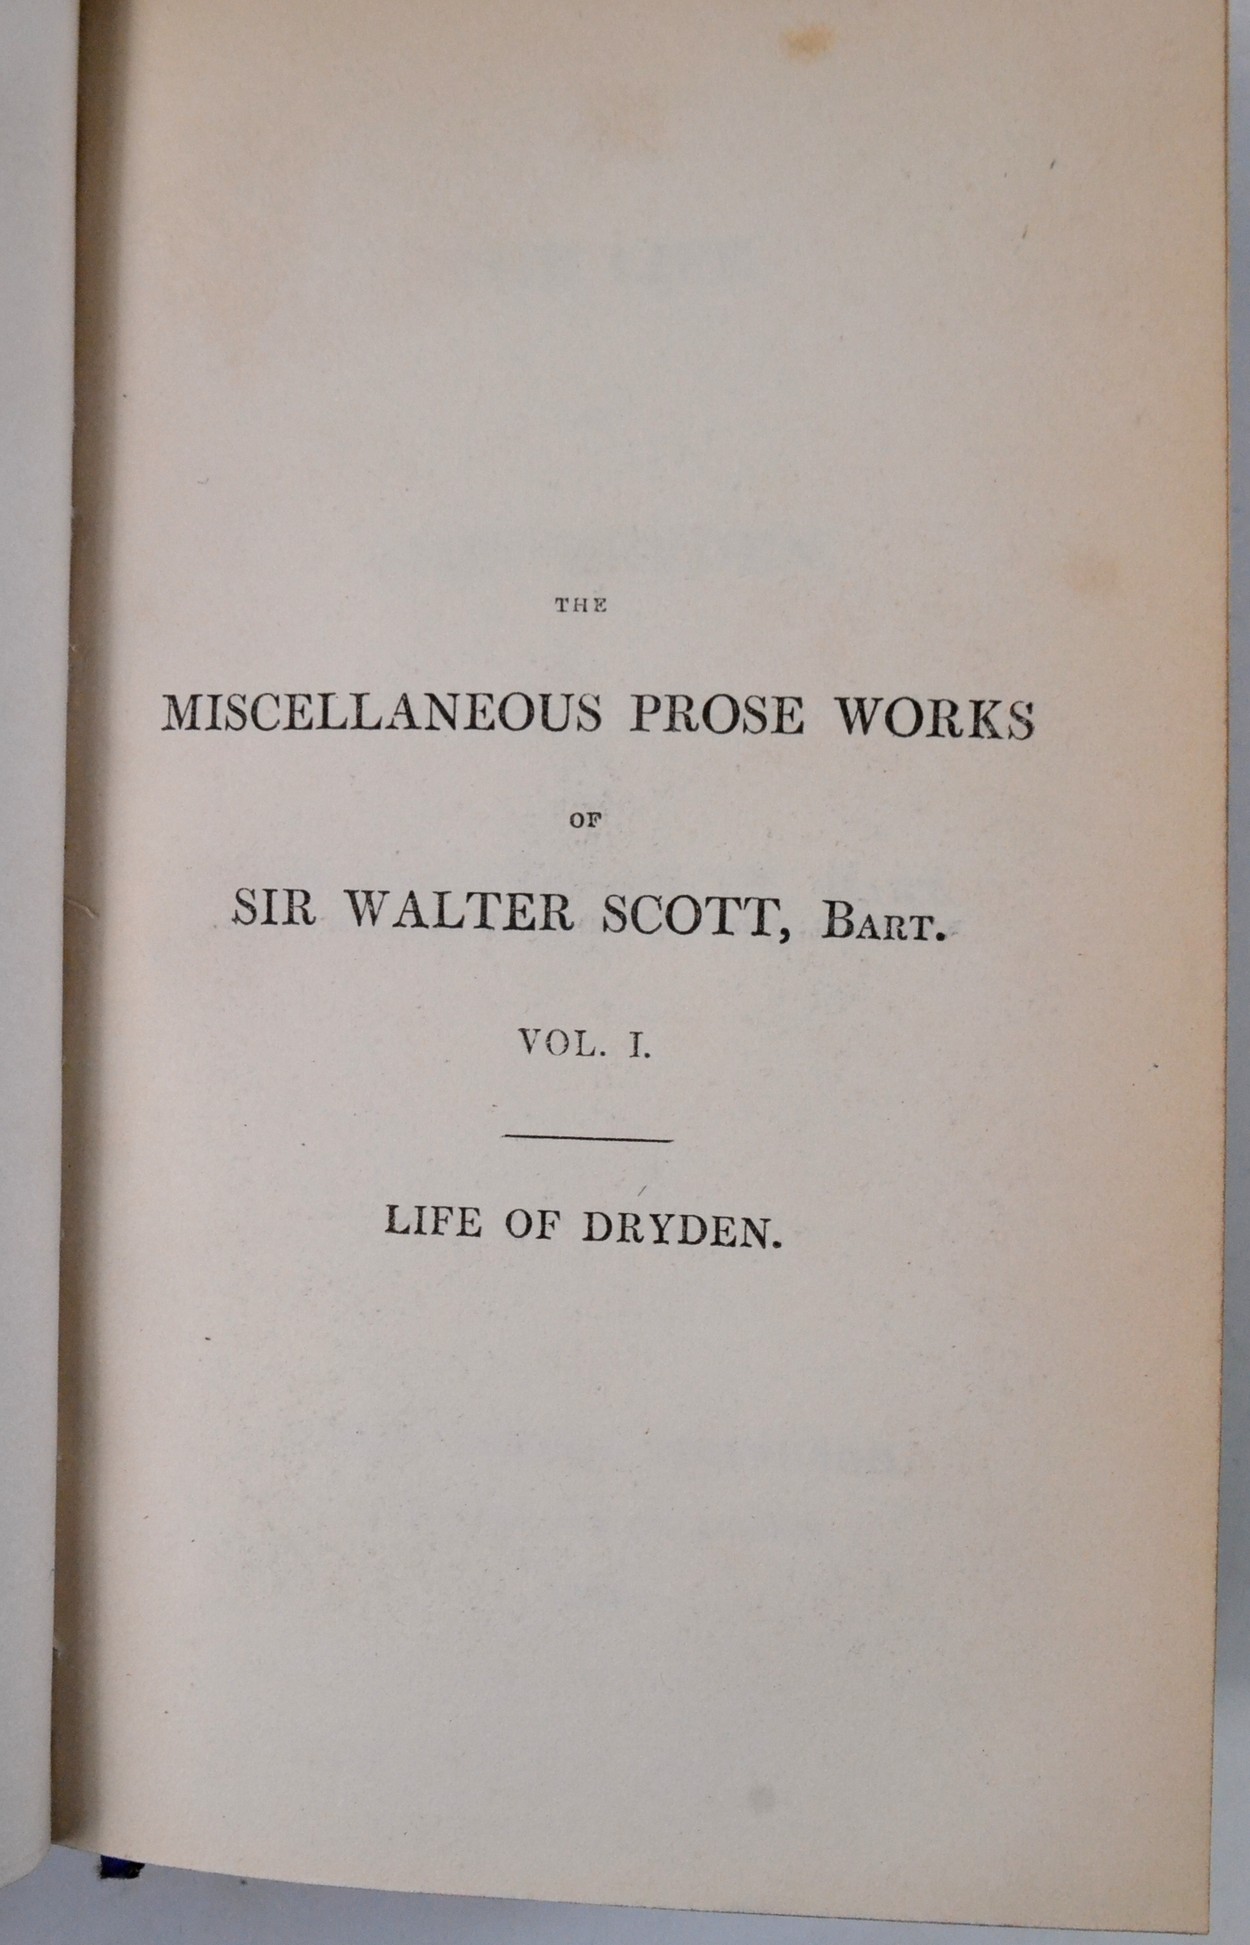 RARE Miscellaneous prose works by Sir Walter Scott (30 volumes) - Image 4 of 13